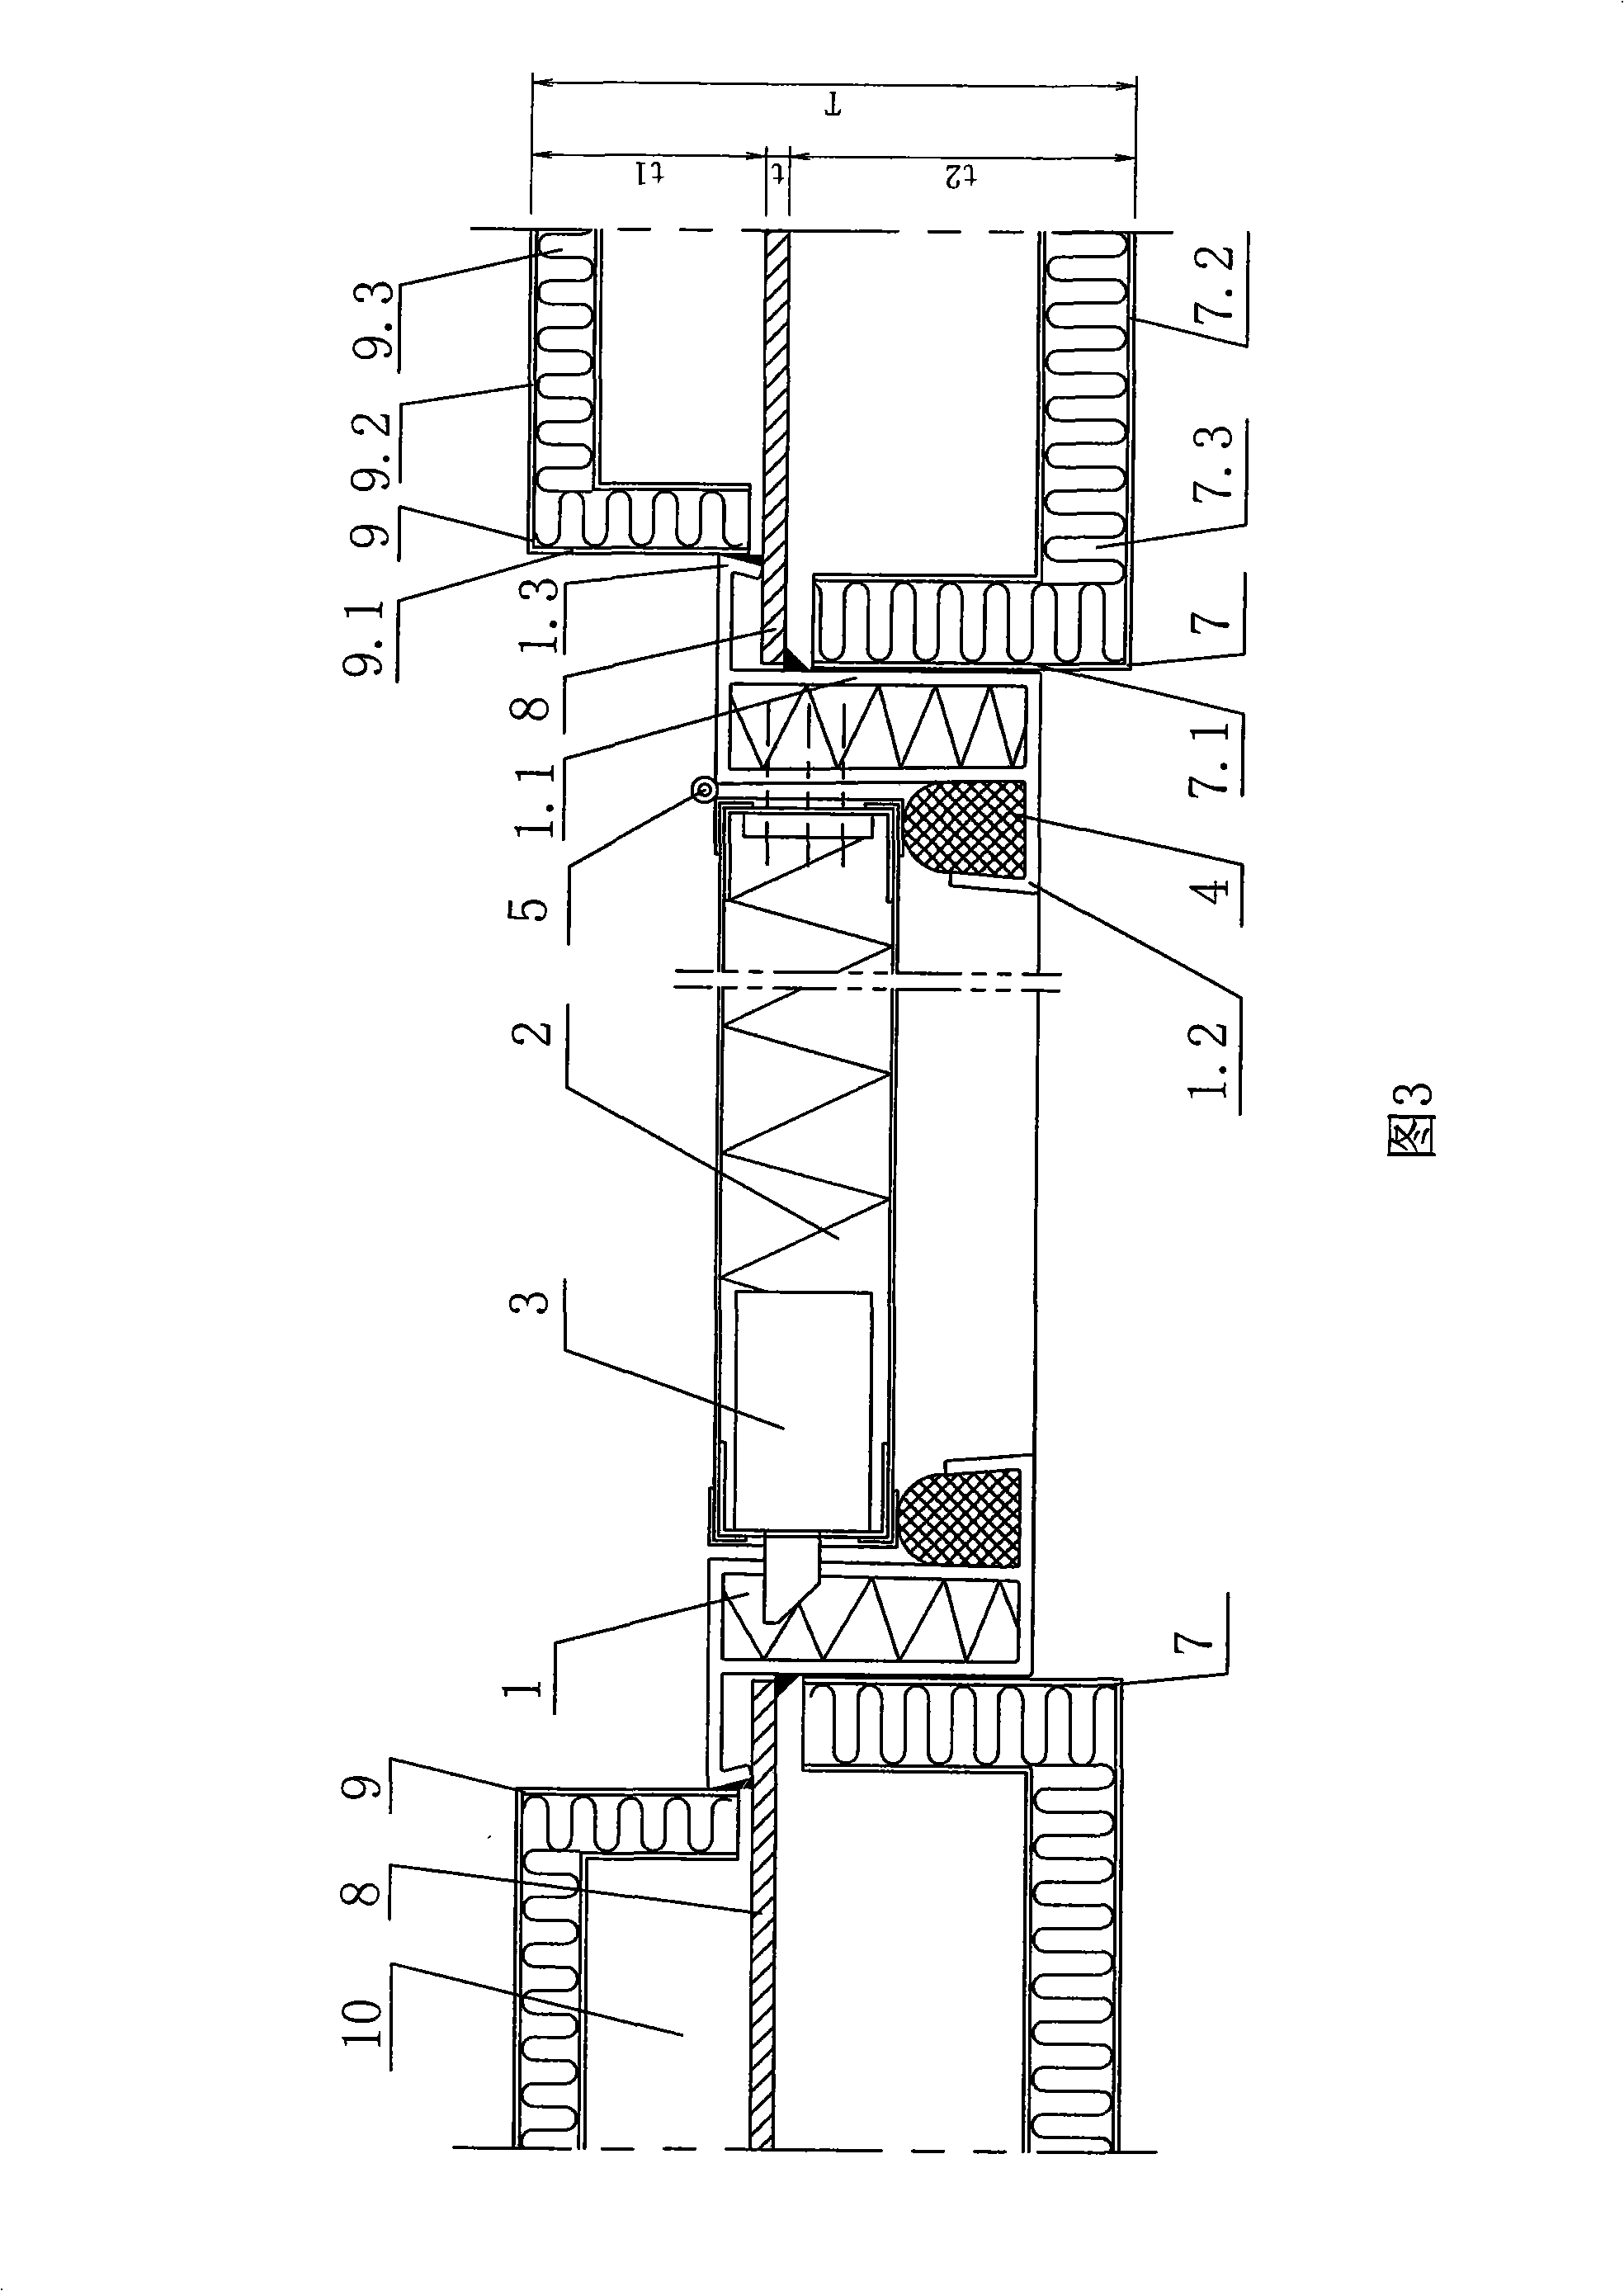 Novel jointing construction between door or frame and wall panel of cabin